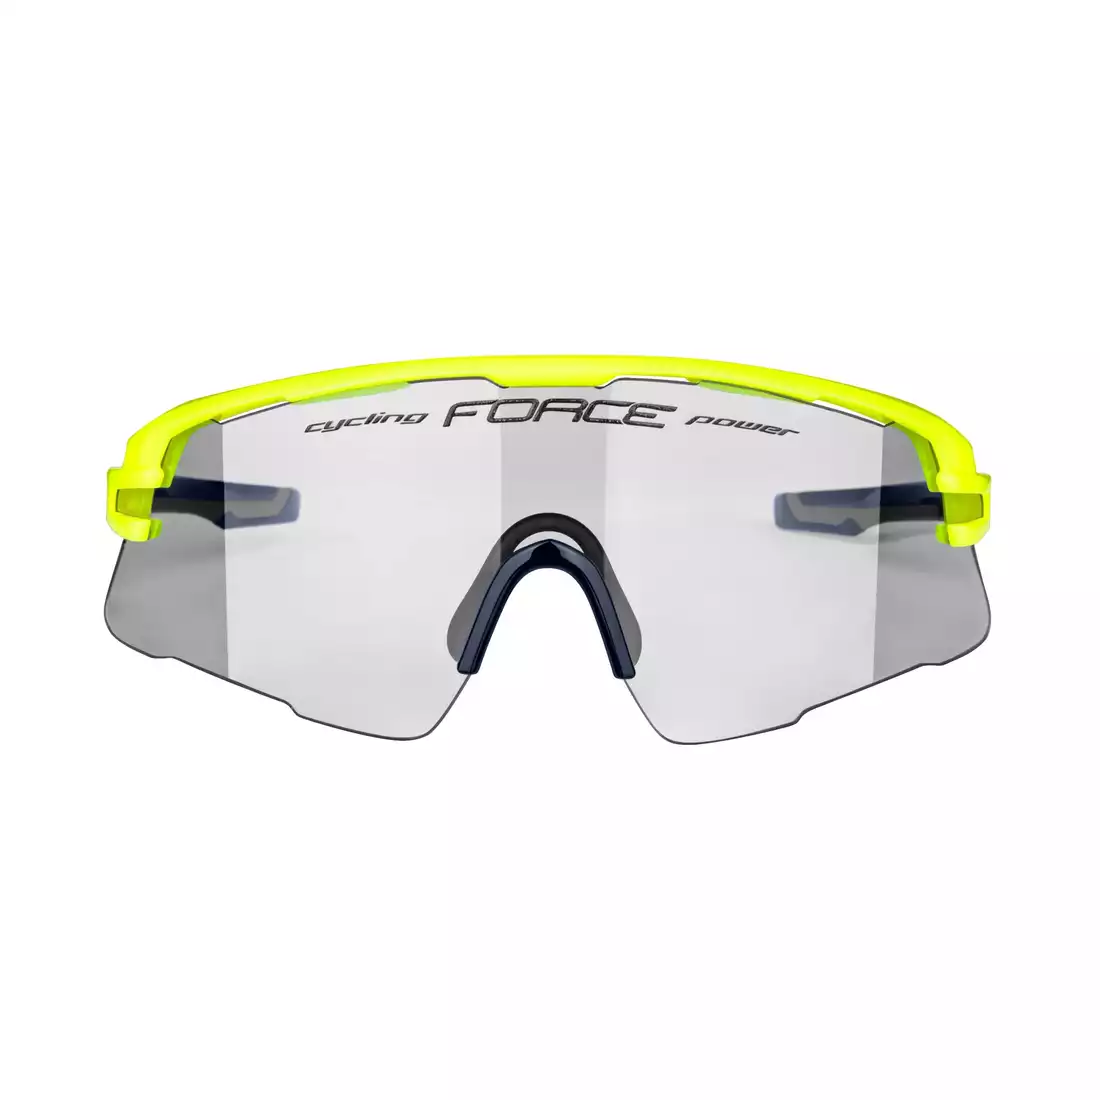 FORCE AMBIENT Photochromic sport glasses, fluo-black